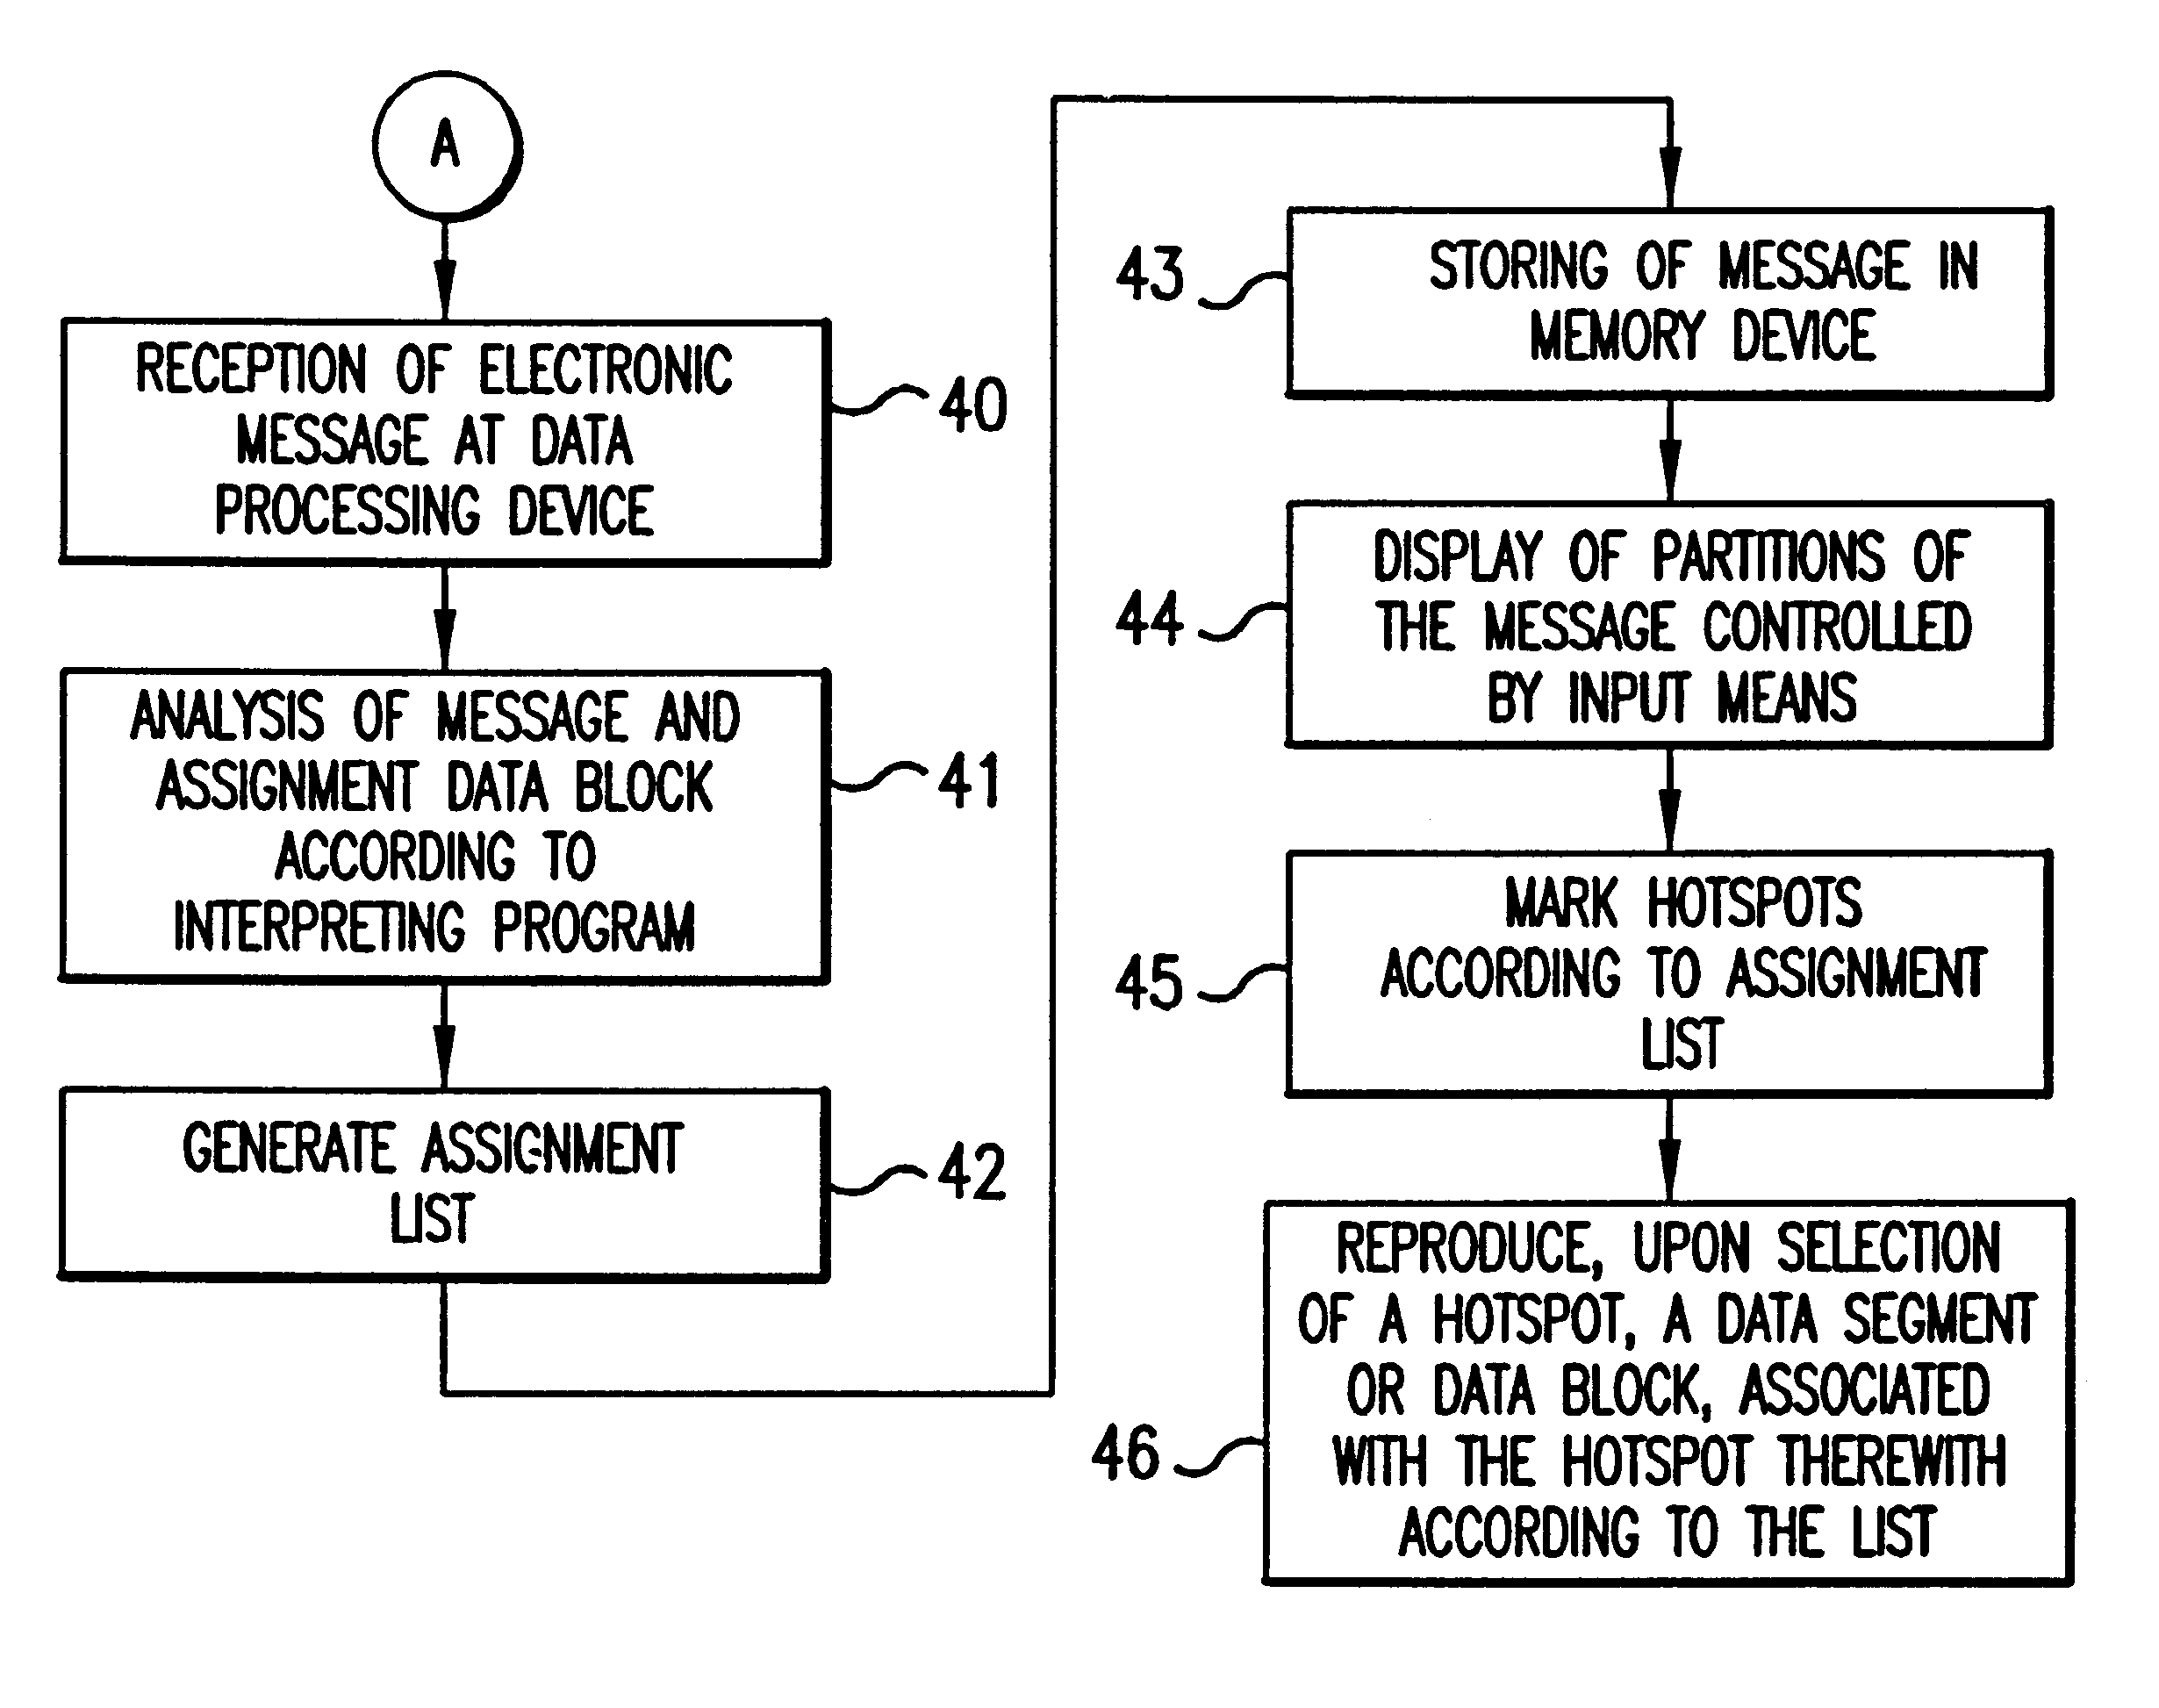 Communication system for electronic messages